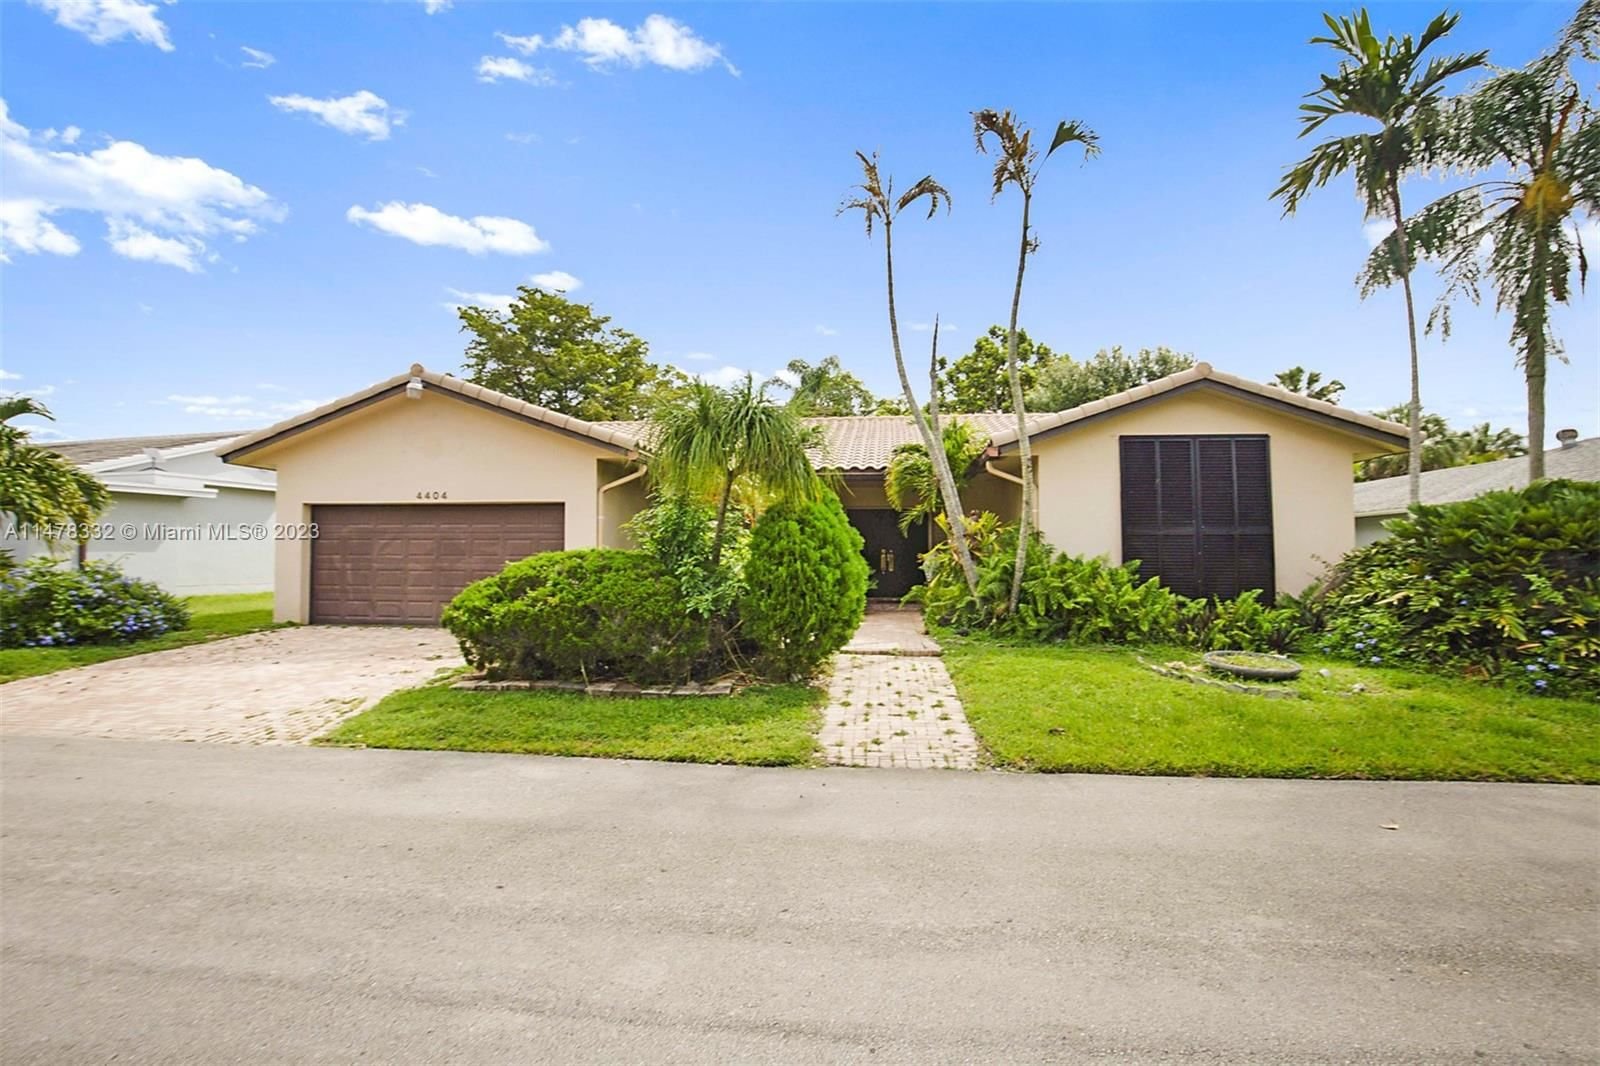 Real estate property located at 4404 Queen Palm Ln, Broward County, WOODLANDS SEC EIGHT, Tamarac, FL